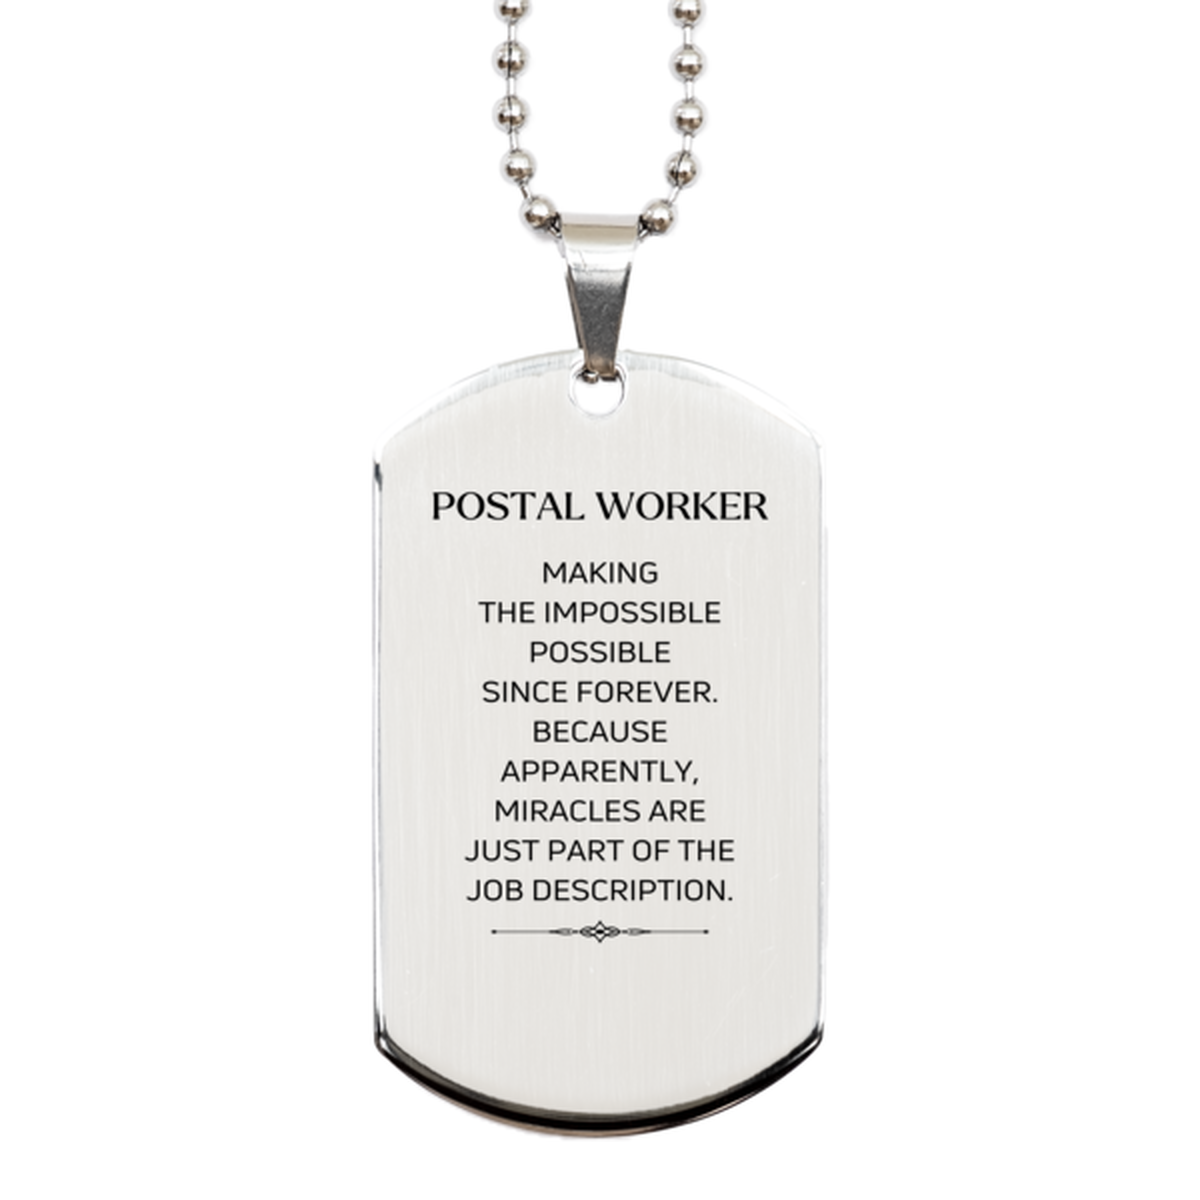 Funny Postal Worker Gifts, Miracles are just part of the job description, Inspirational Birthday Silver Dog Tag For Postal Worker, Men, Women, Coworkers, Friends, Boss